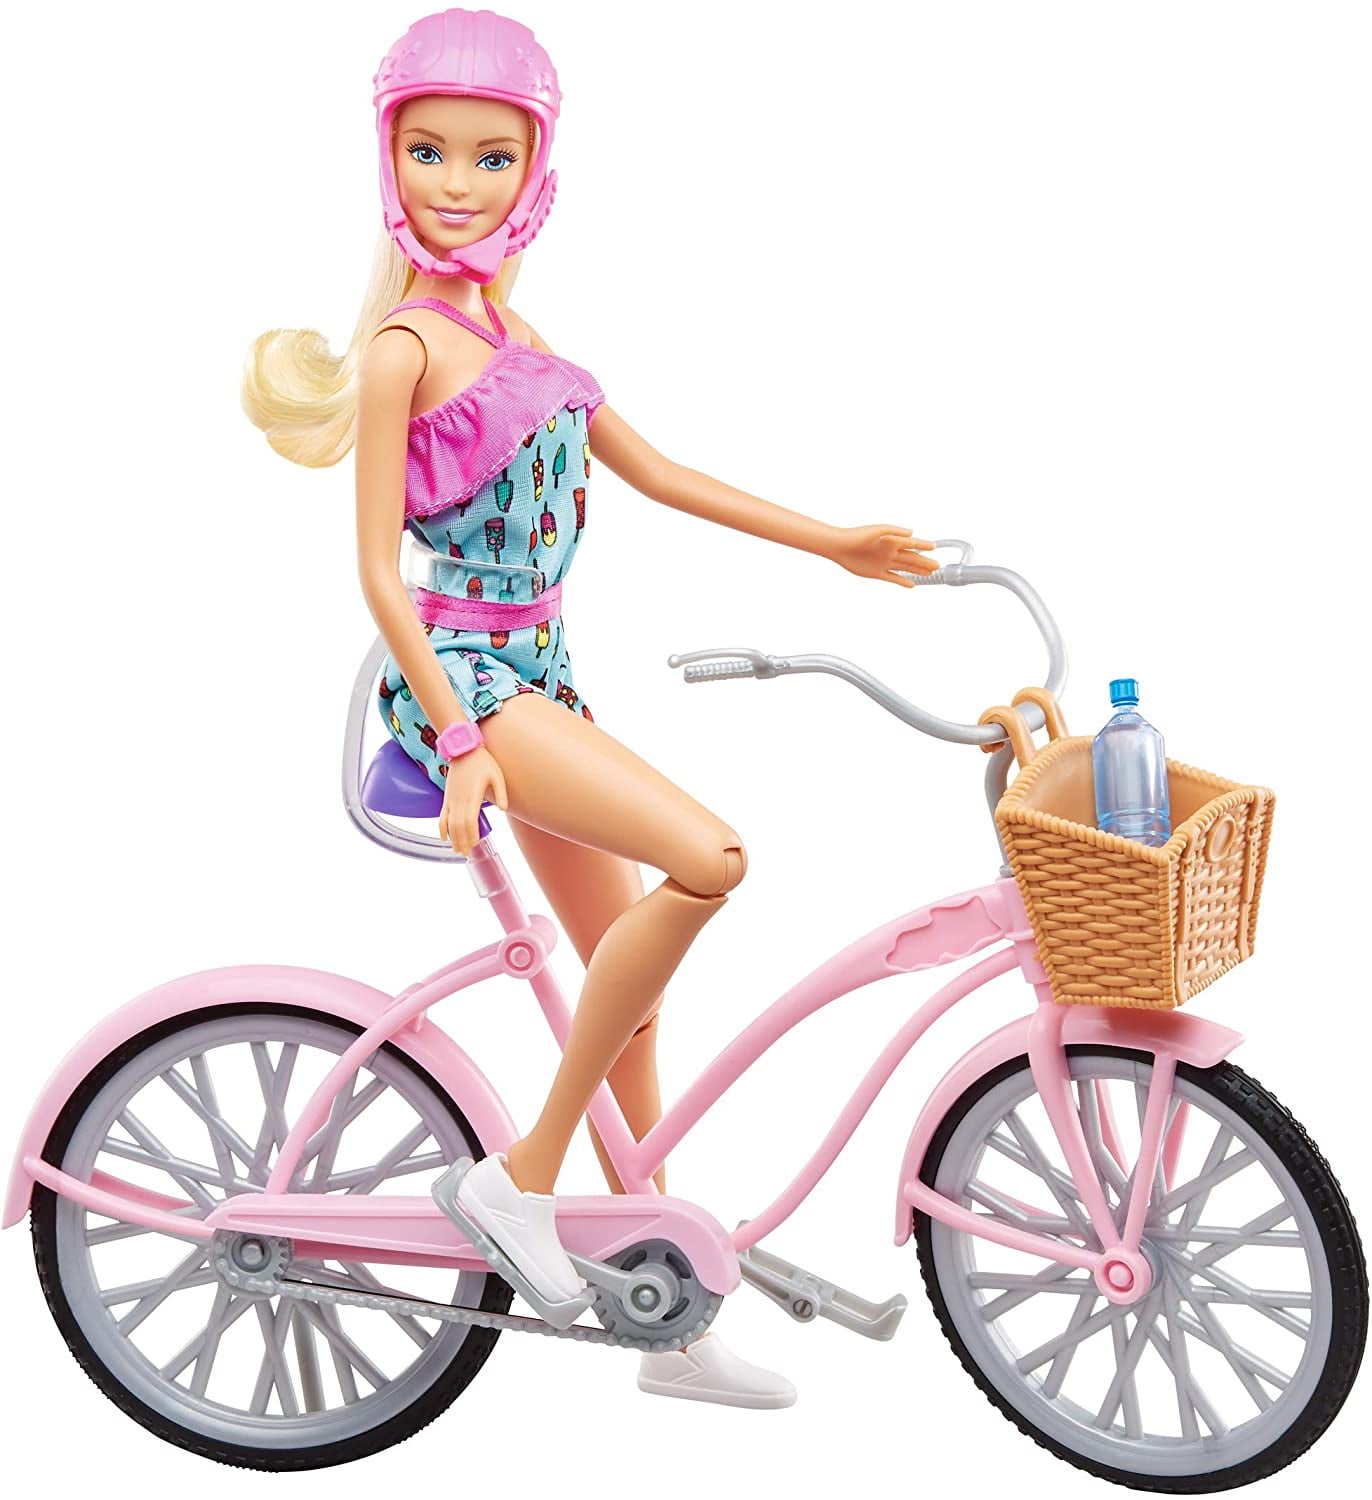 suit Persistence Conquest Barbie Ftv96 Doll with Bicycle and Accessories - Walmart.com